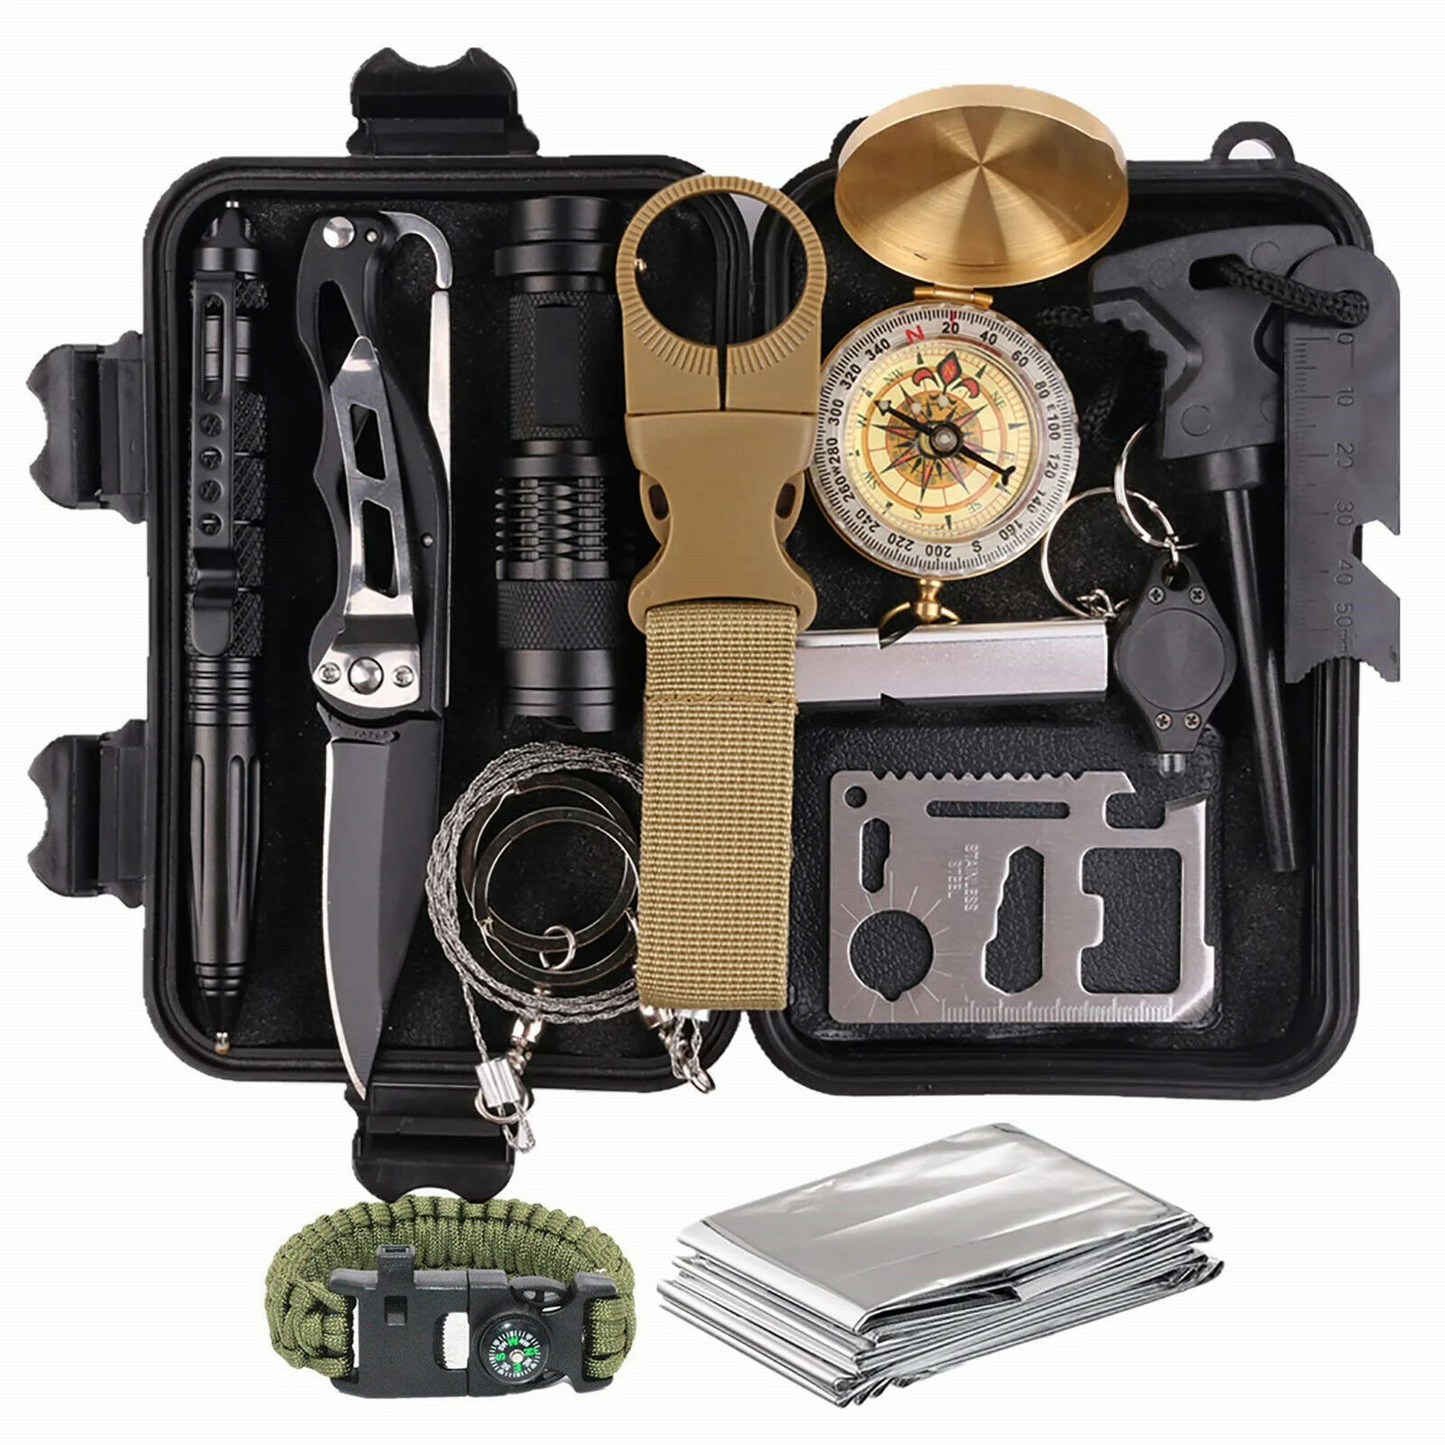 14 in 1 Outdoor Emergency Survival Gear Kit Camping Tactical Tools